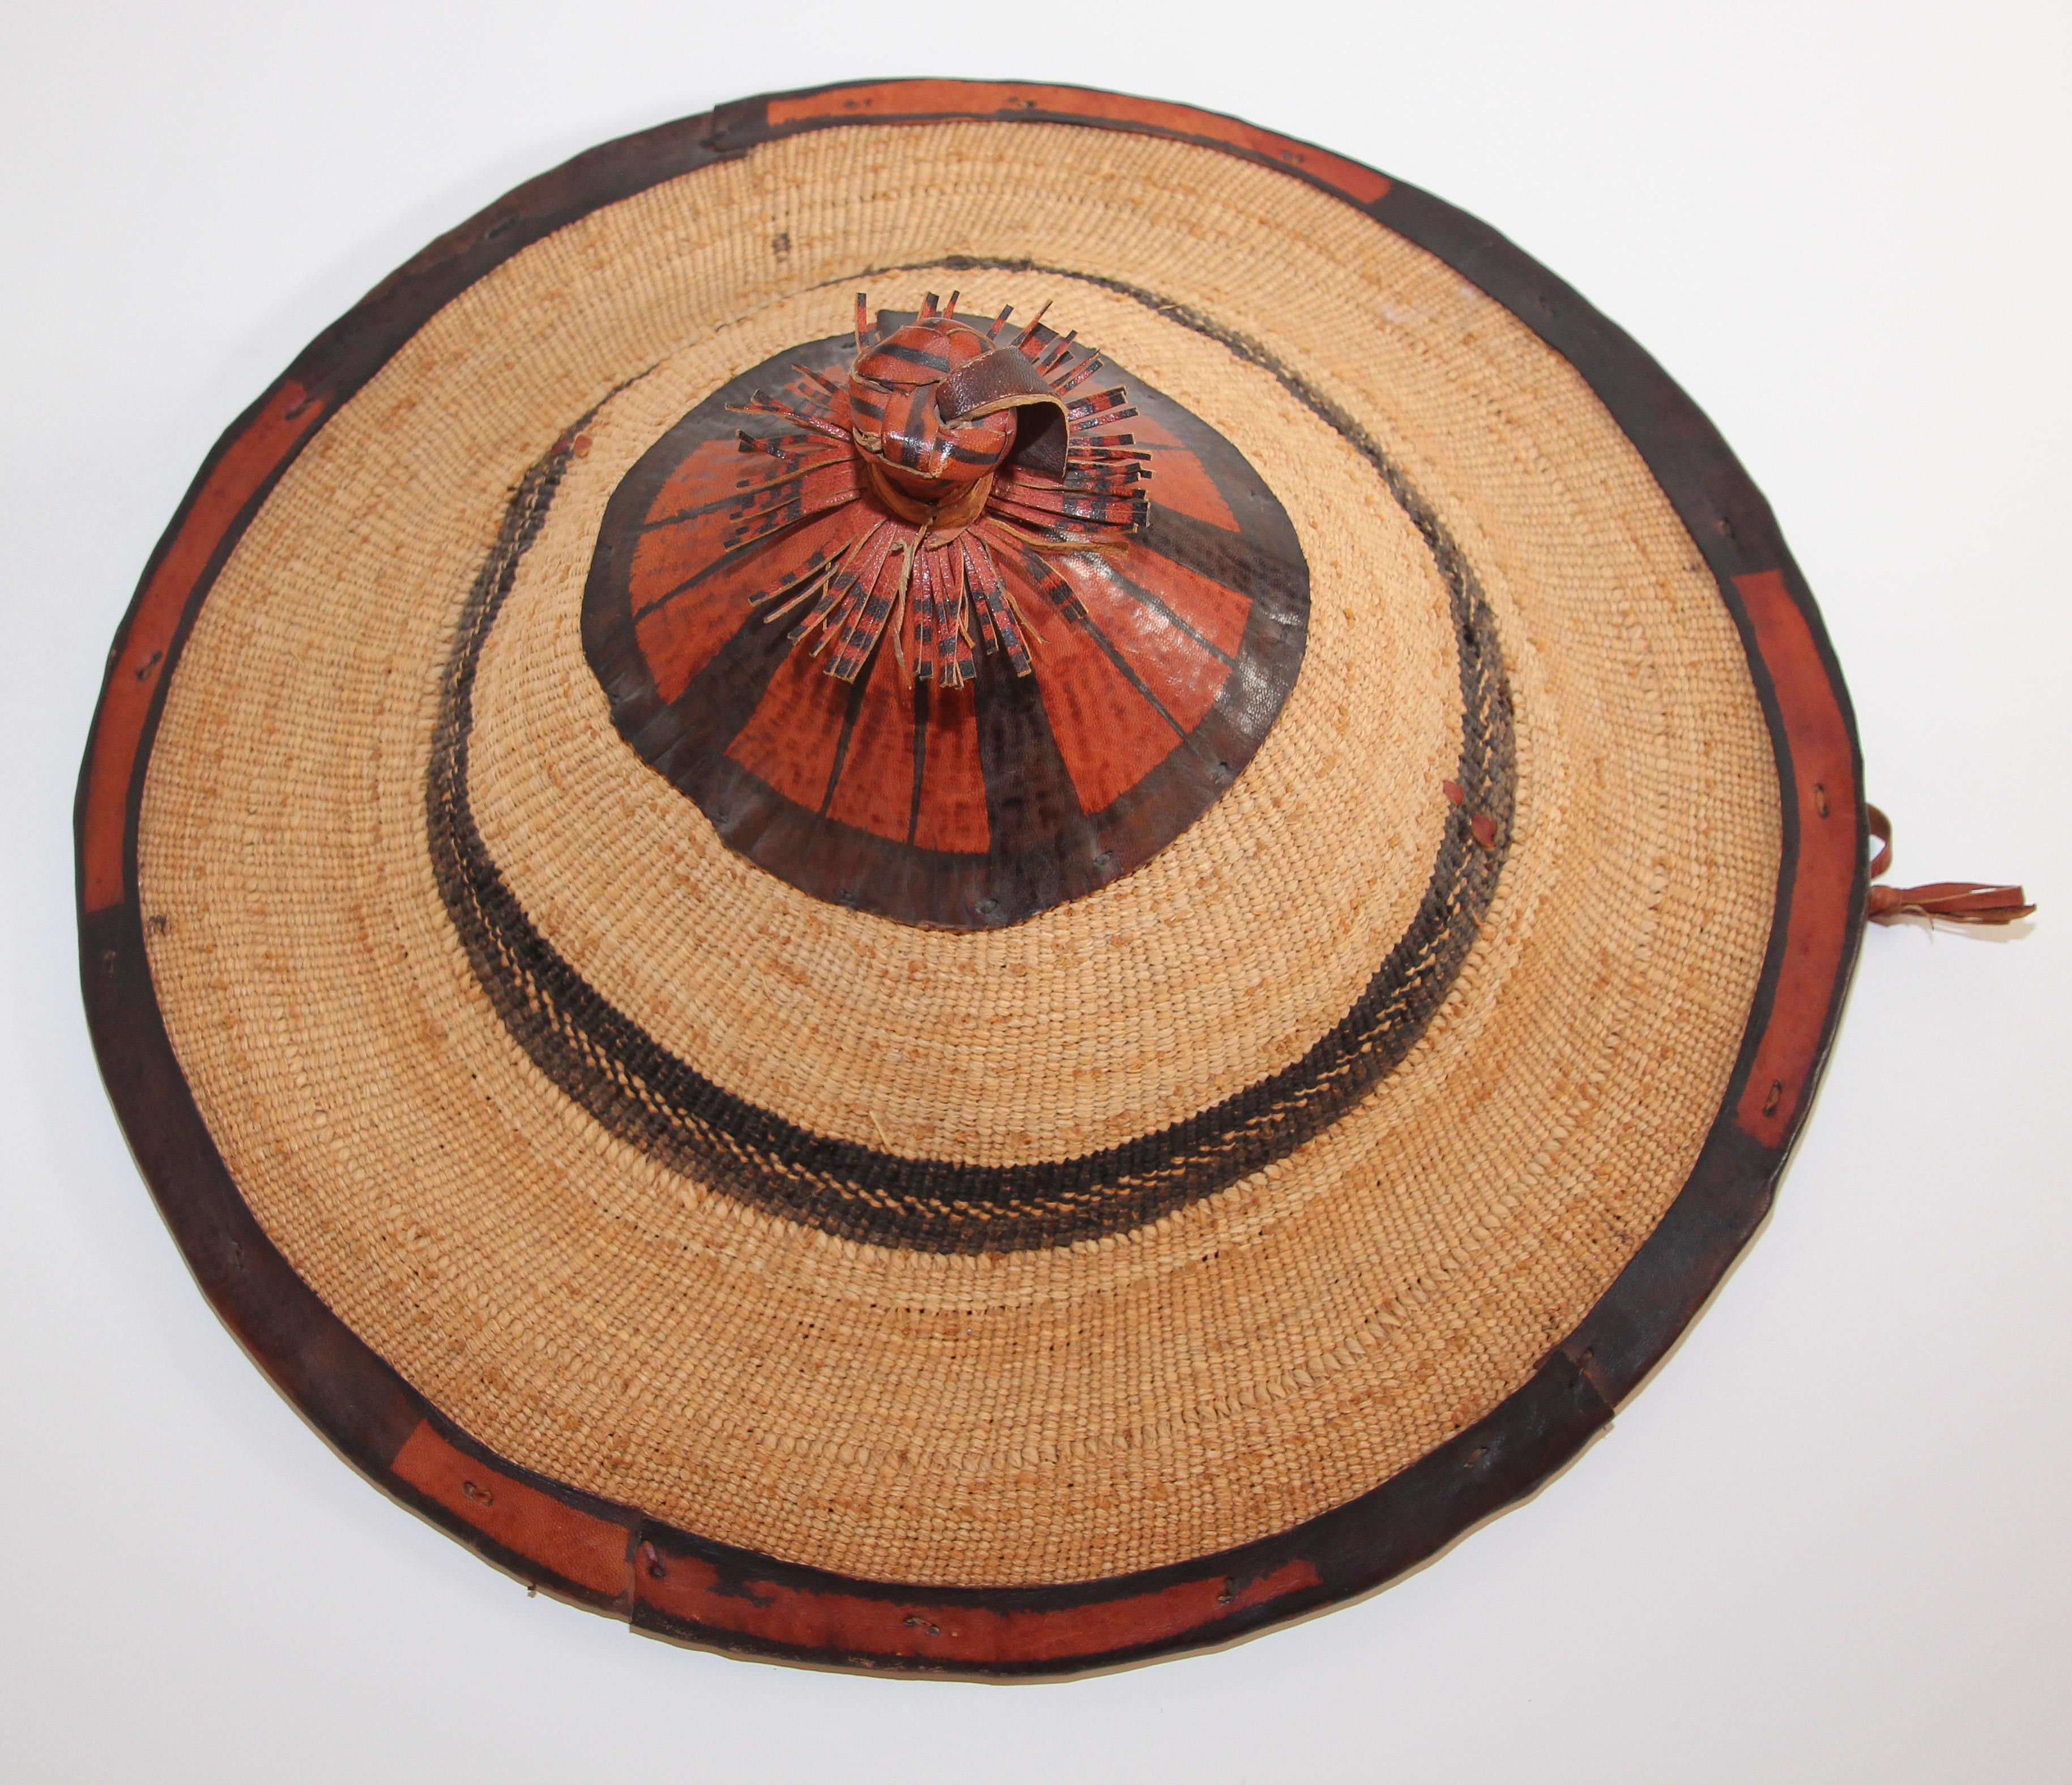 Large conical leather and straw tribal Fulani hat, Mali West Africa
Fiber hat with leather applications that comes from the Fulani people in West Africa.
It is typically worn by the Wodaabe, a nomadic cattle-herder subgroup of the Fulani.
It is